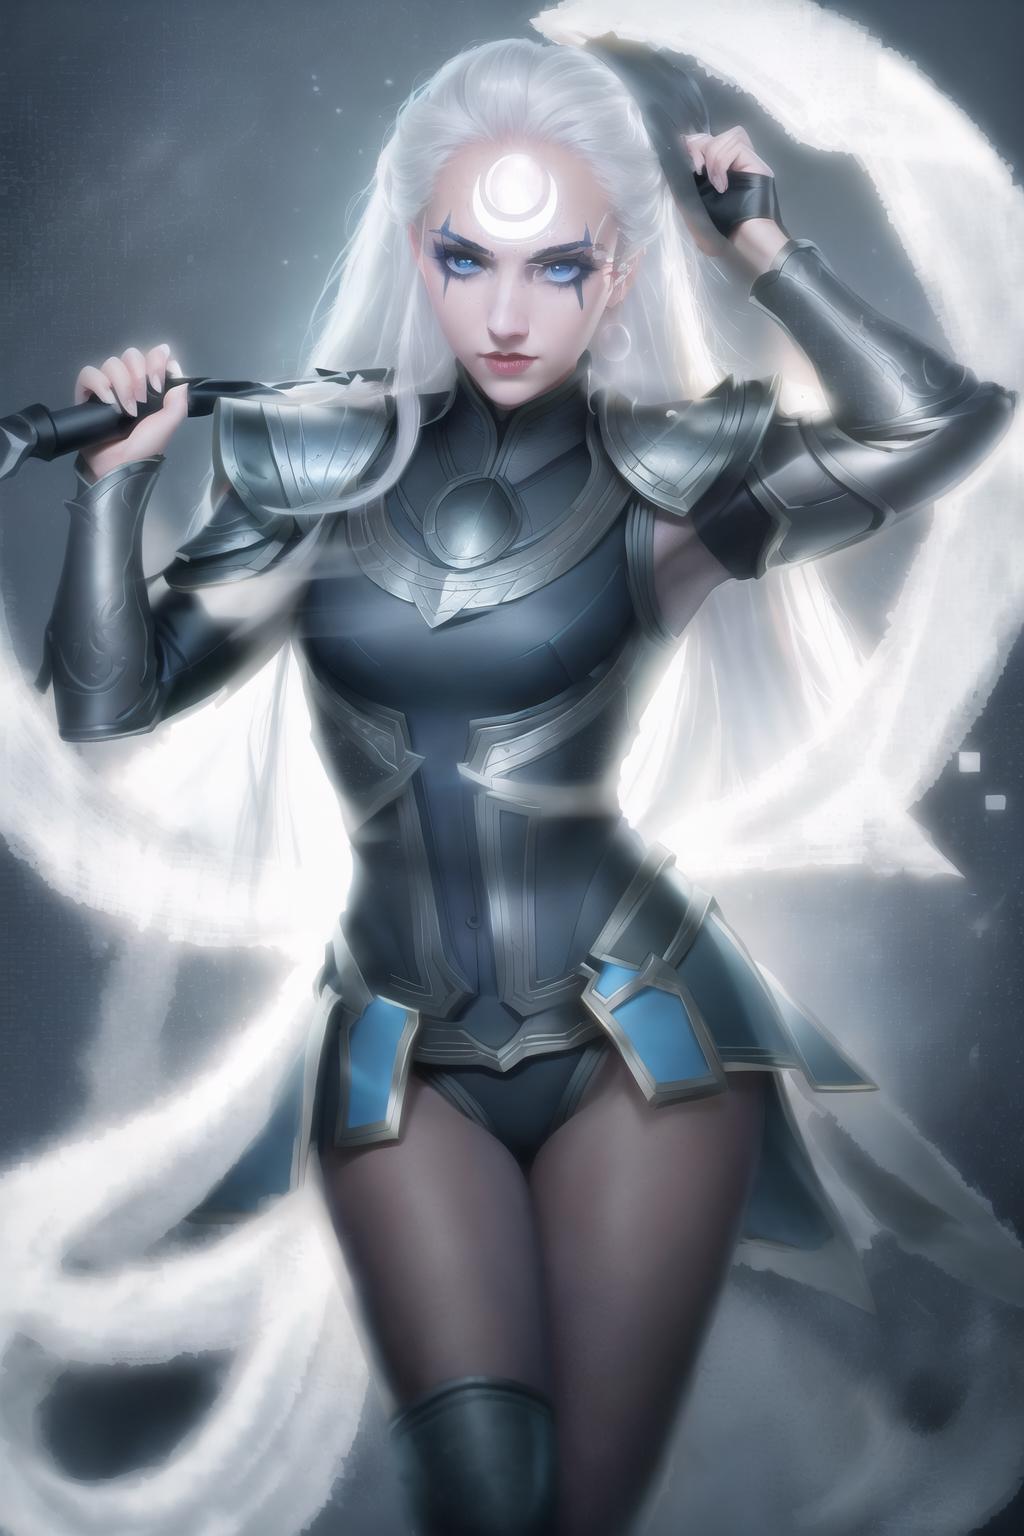 Diana from league of legends image by Sasukelric